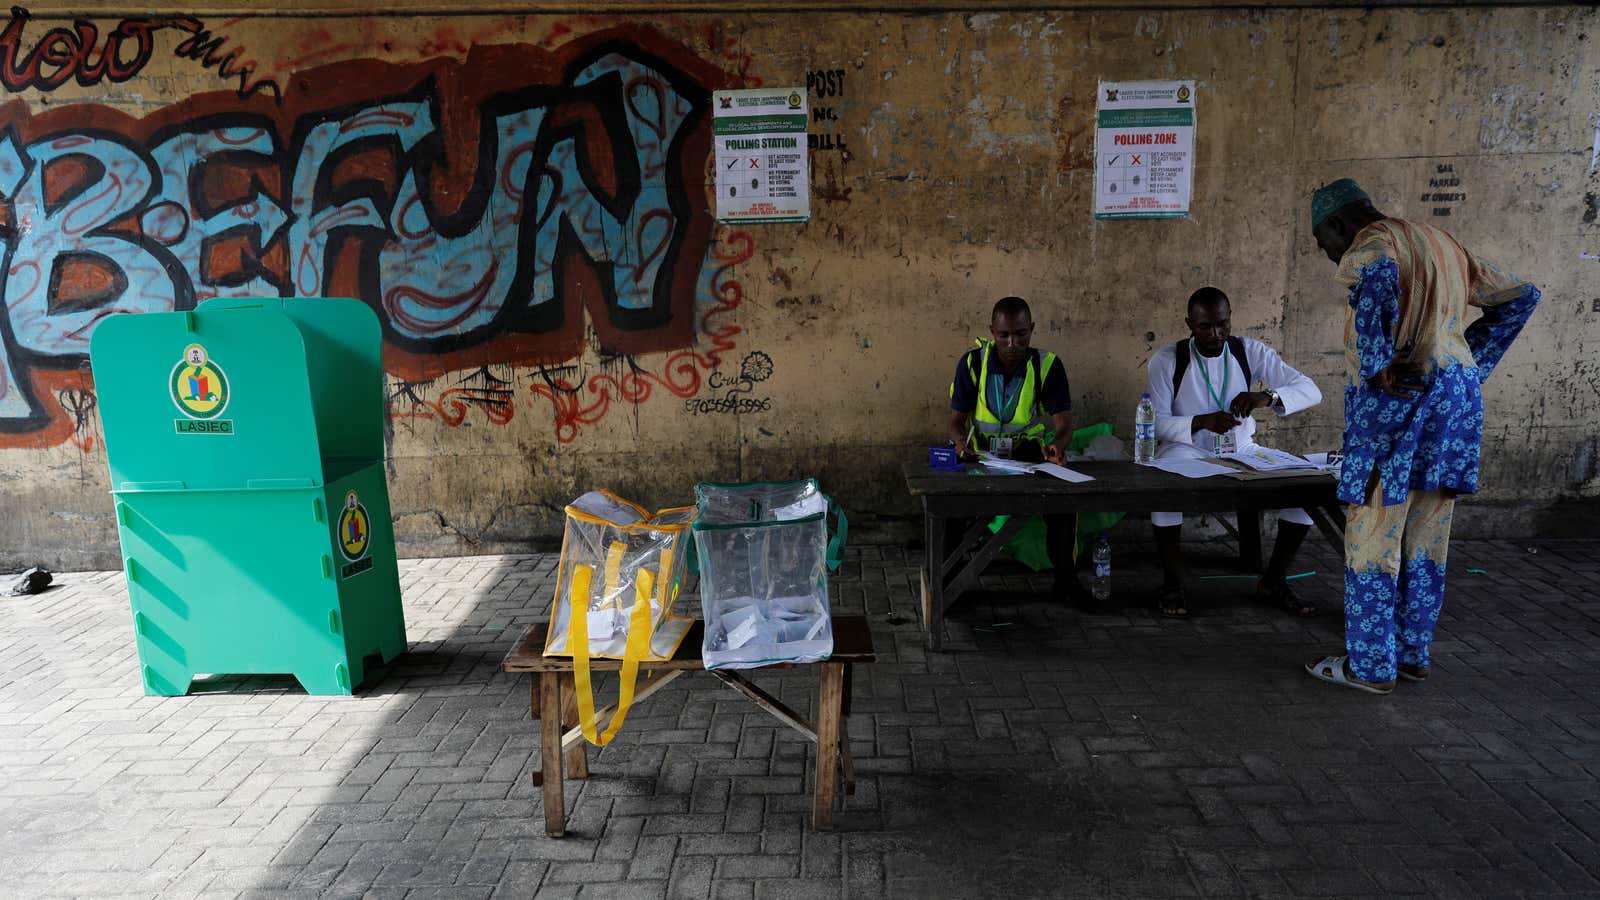 Election officials speak with a voter at the start of the local government election in Ikeja district in Lagos, Nigeria July 22, 2017.REUTERS/Akintunde Akinleye